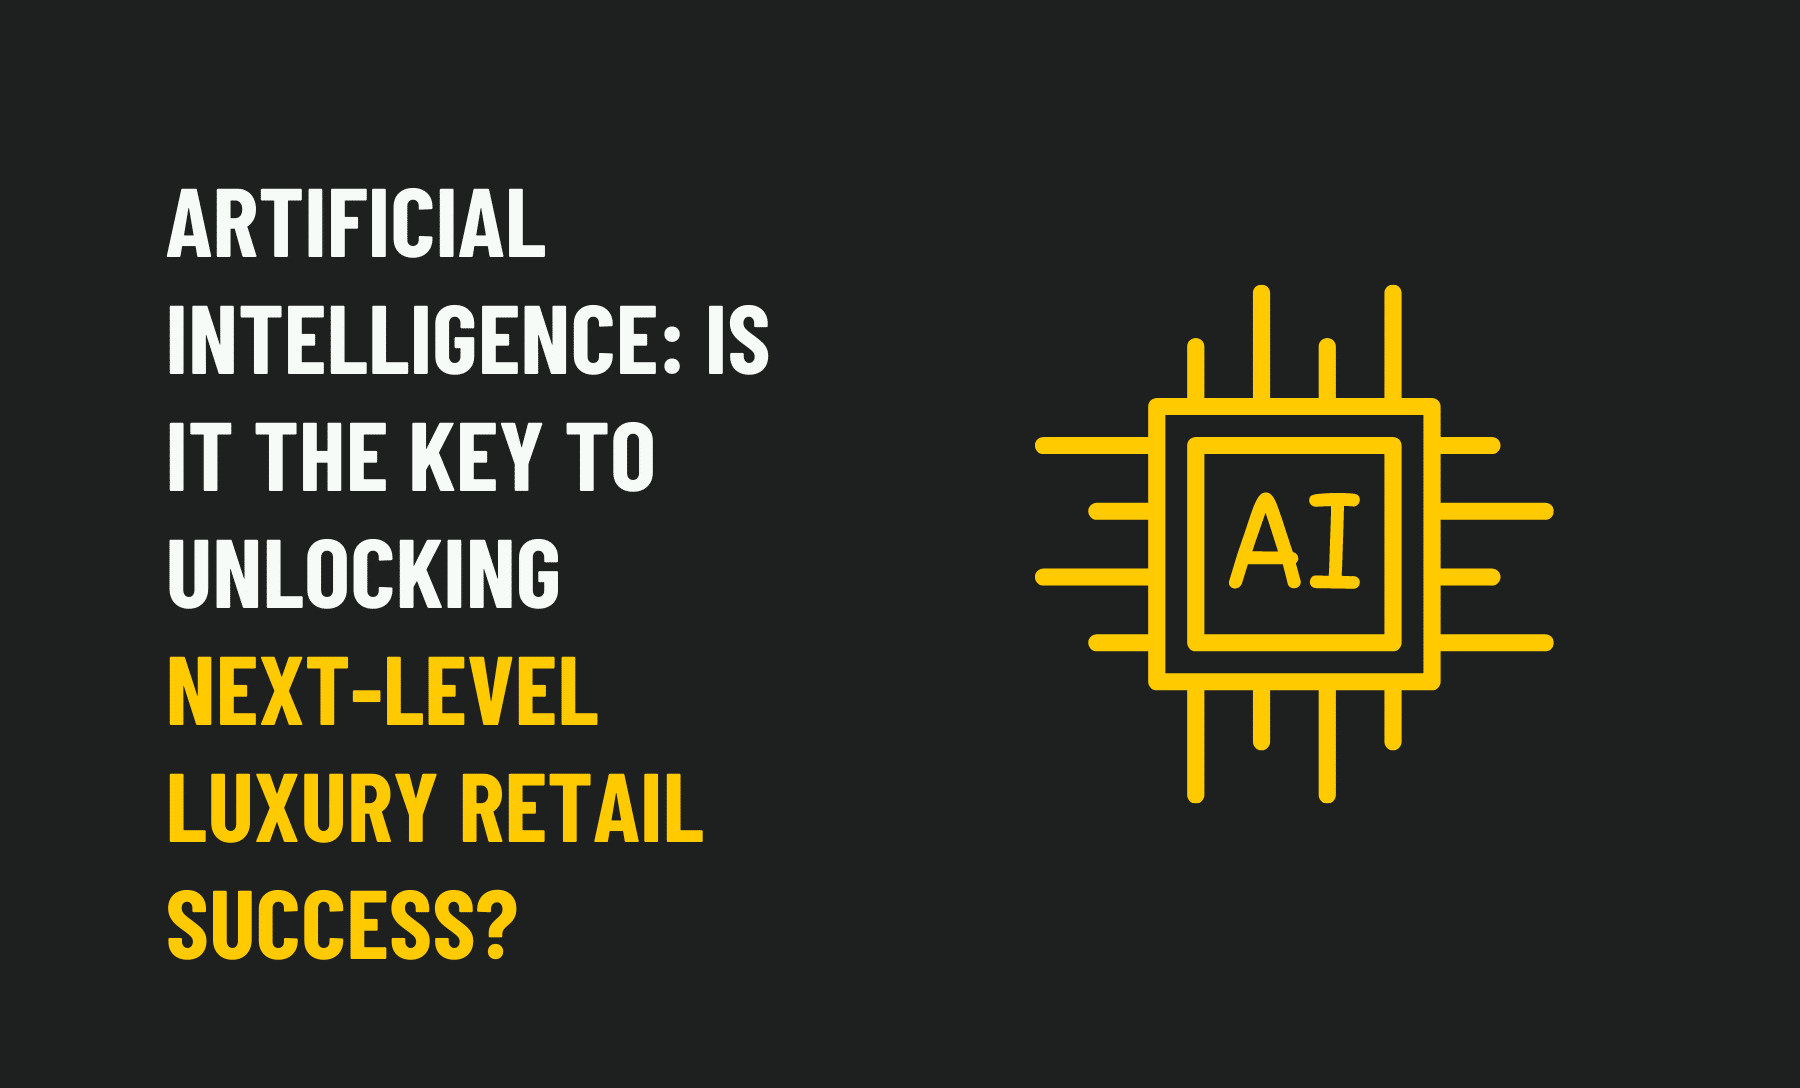 Artificial Intelligence: Is It the Key to Unlocking Next-Level Luxury Retail Success?